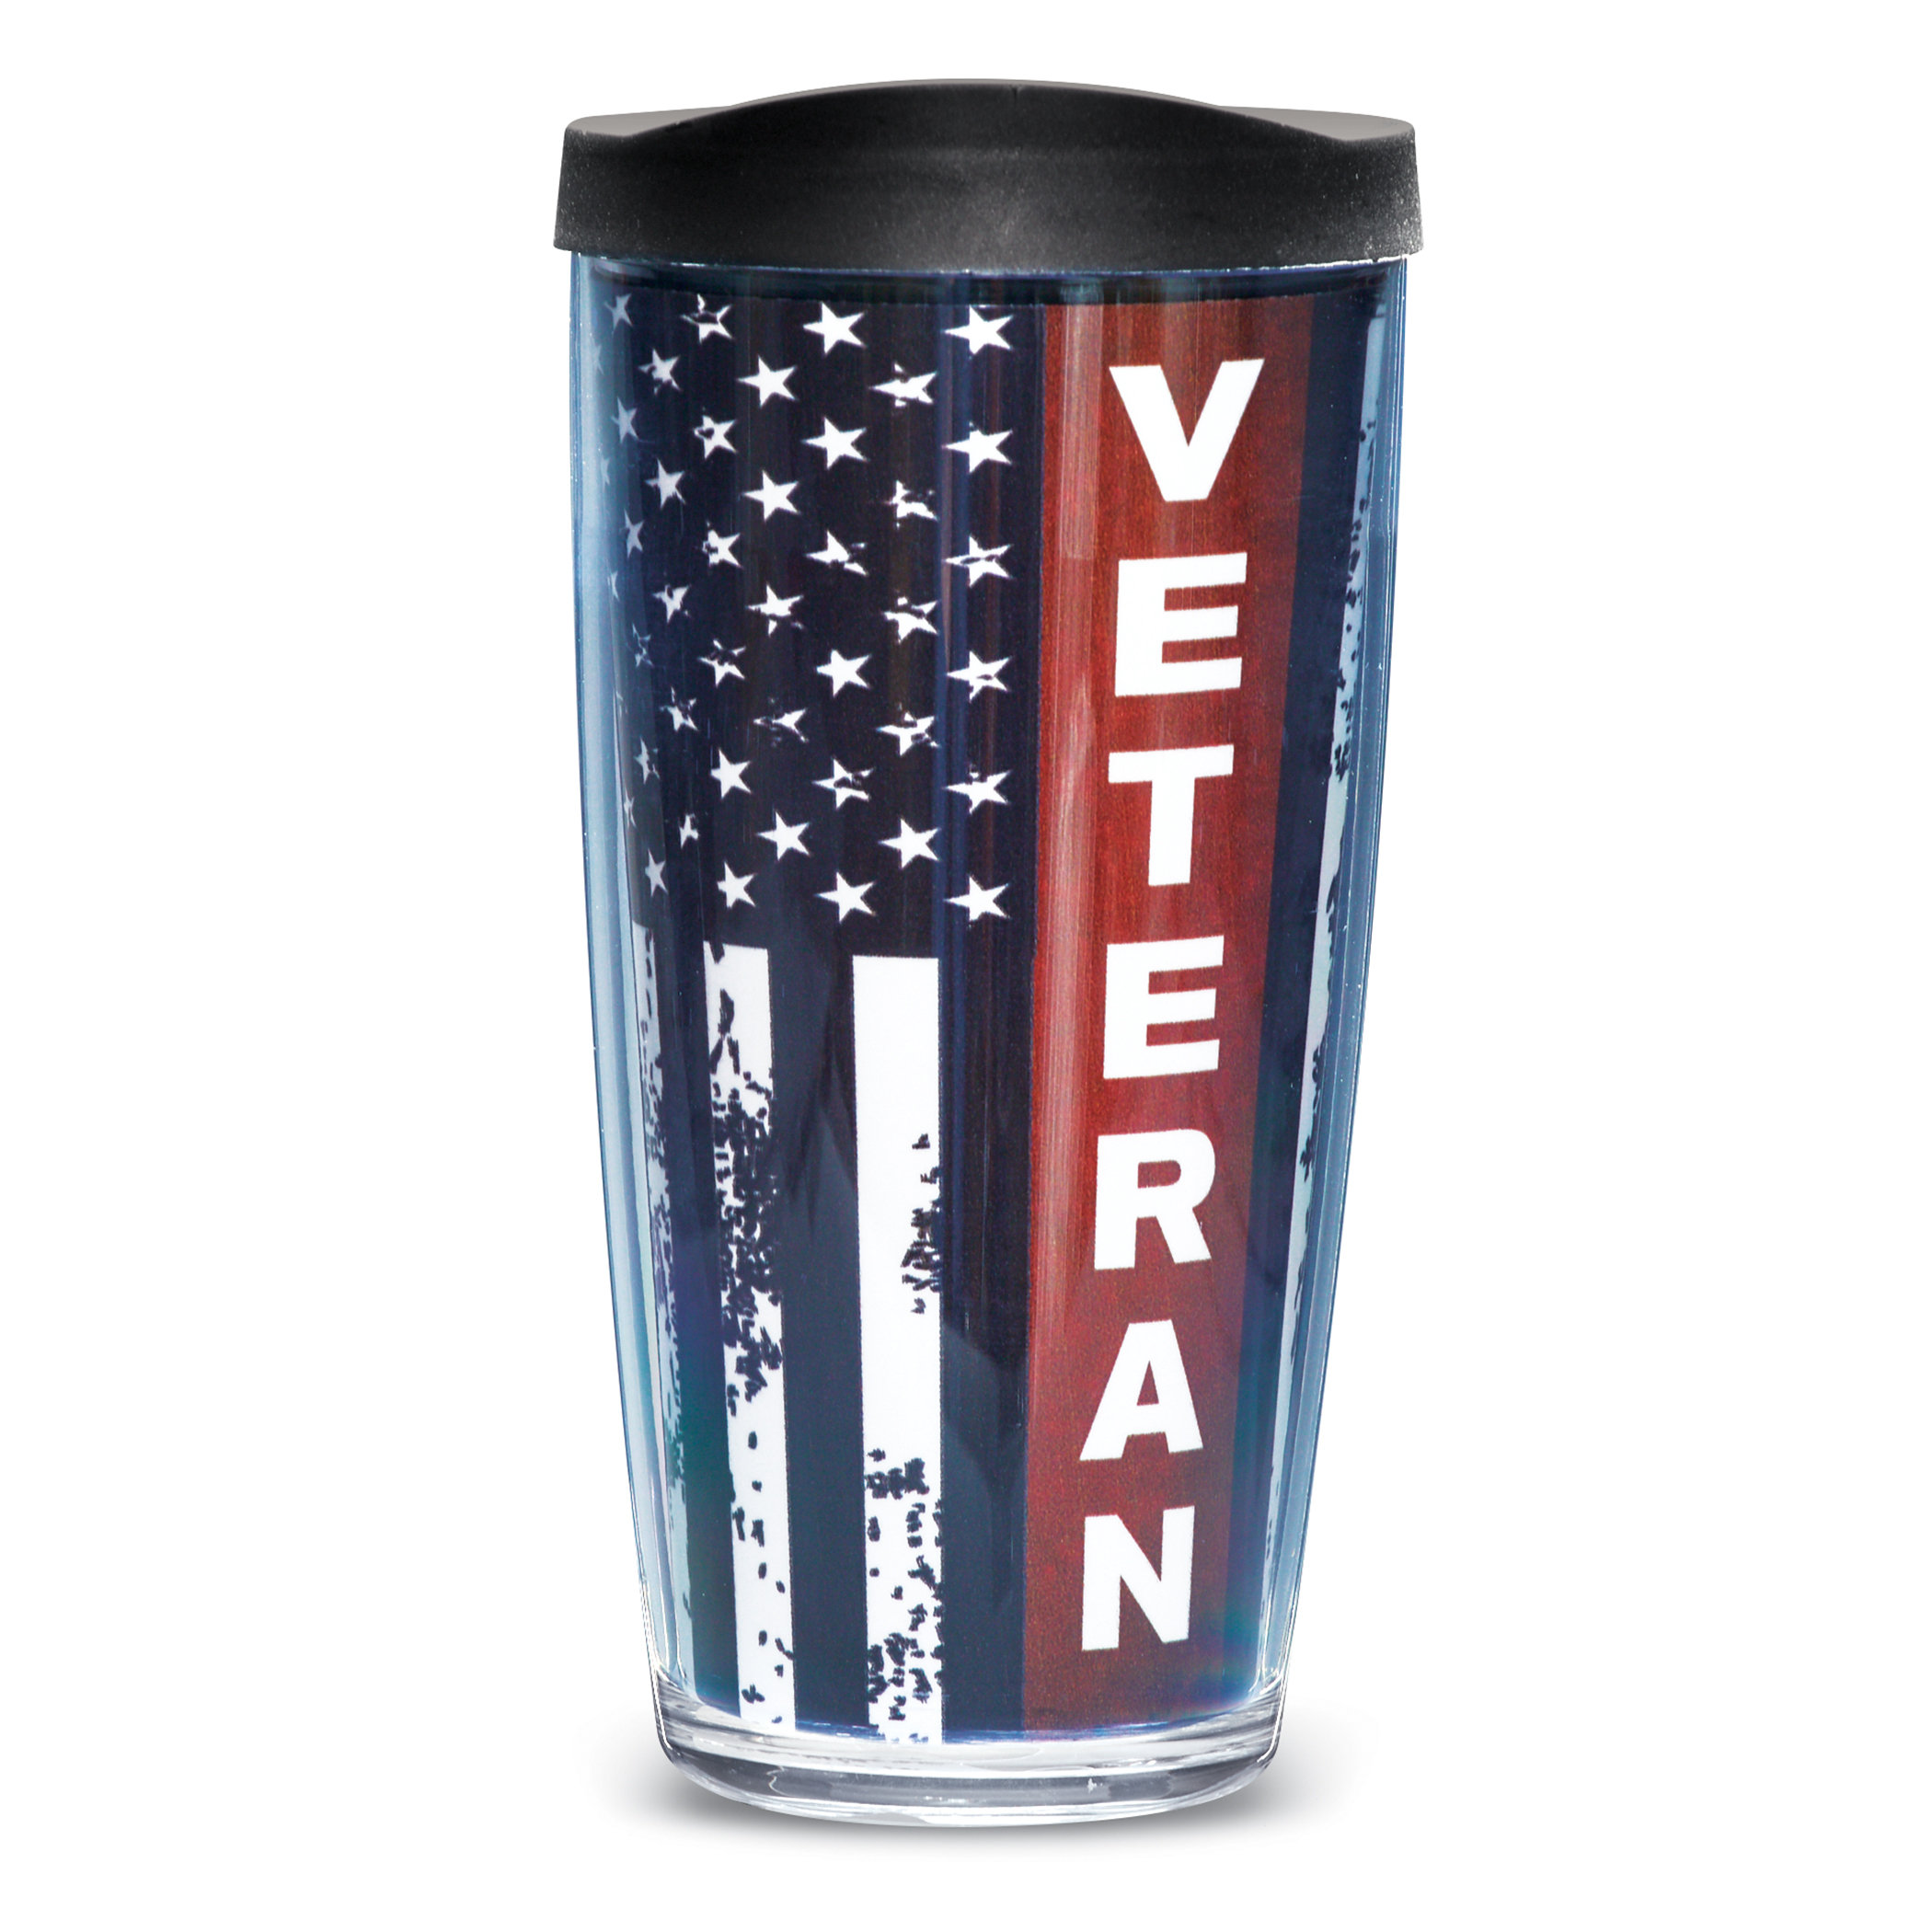 Air Force Stainless Steel Travel Mug - Stars & Stripes, The Flag Store